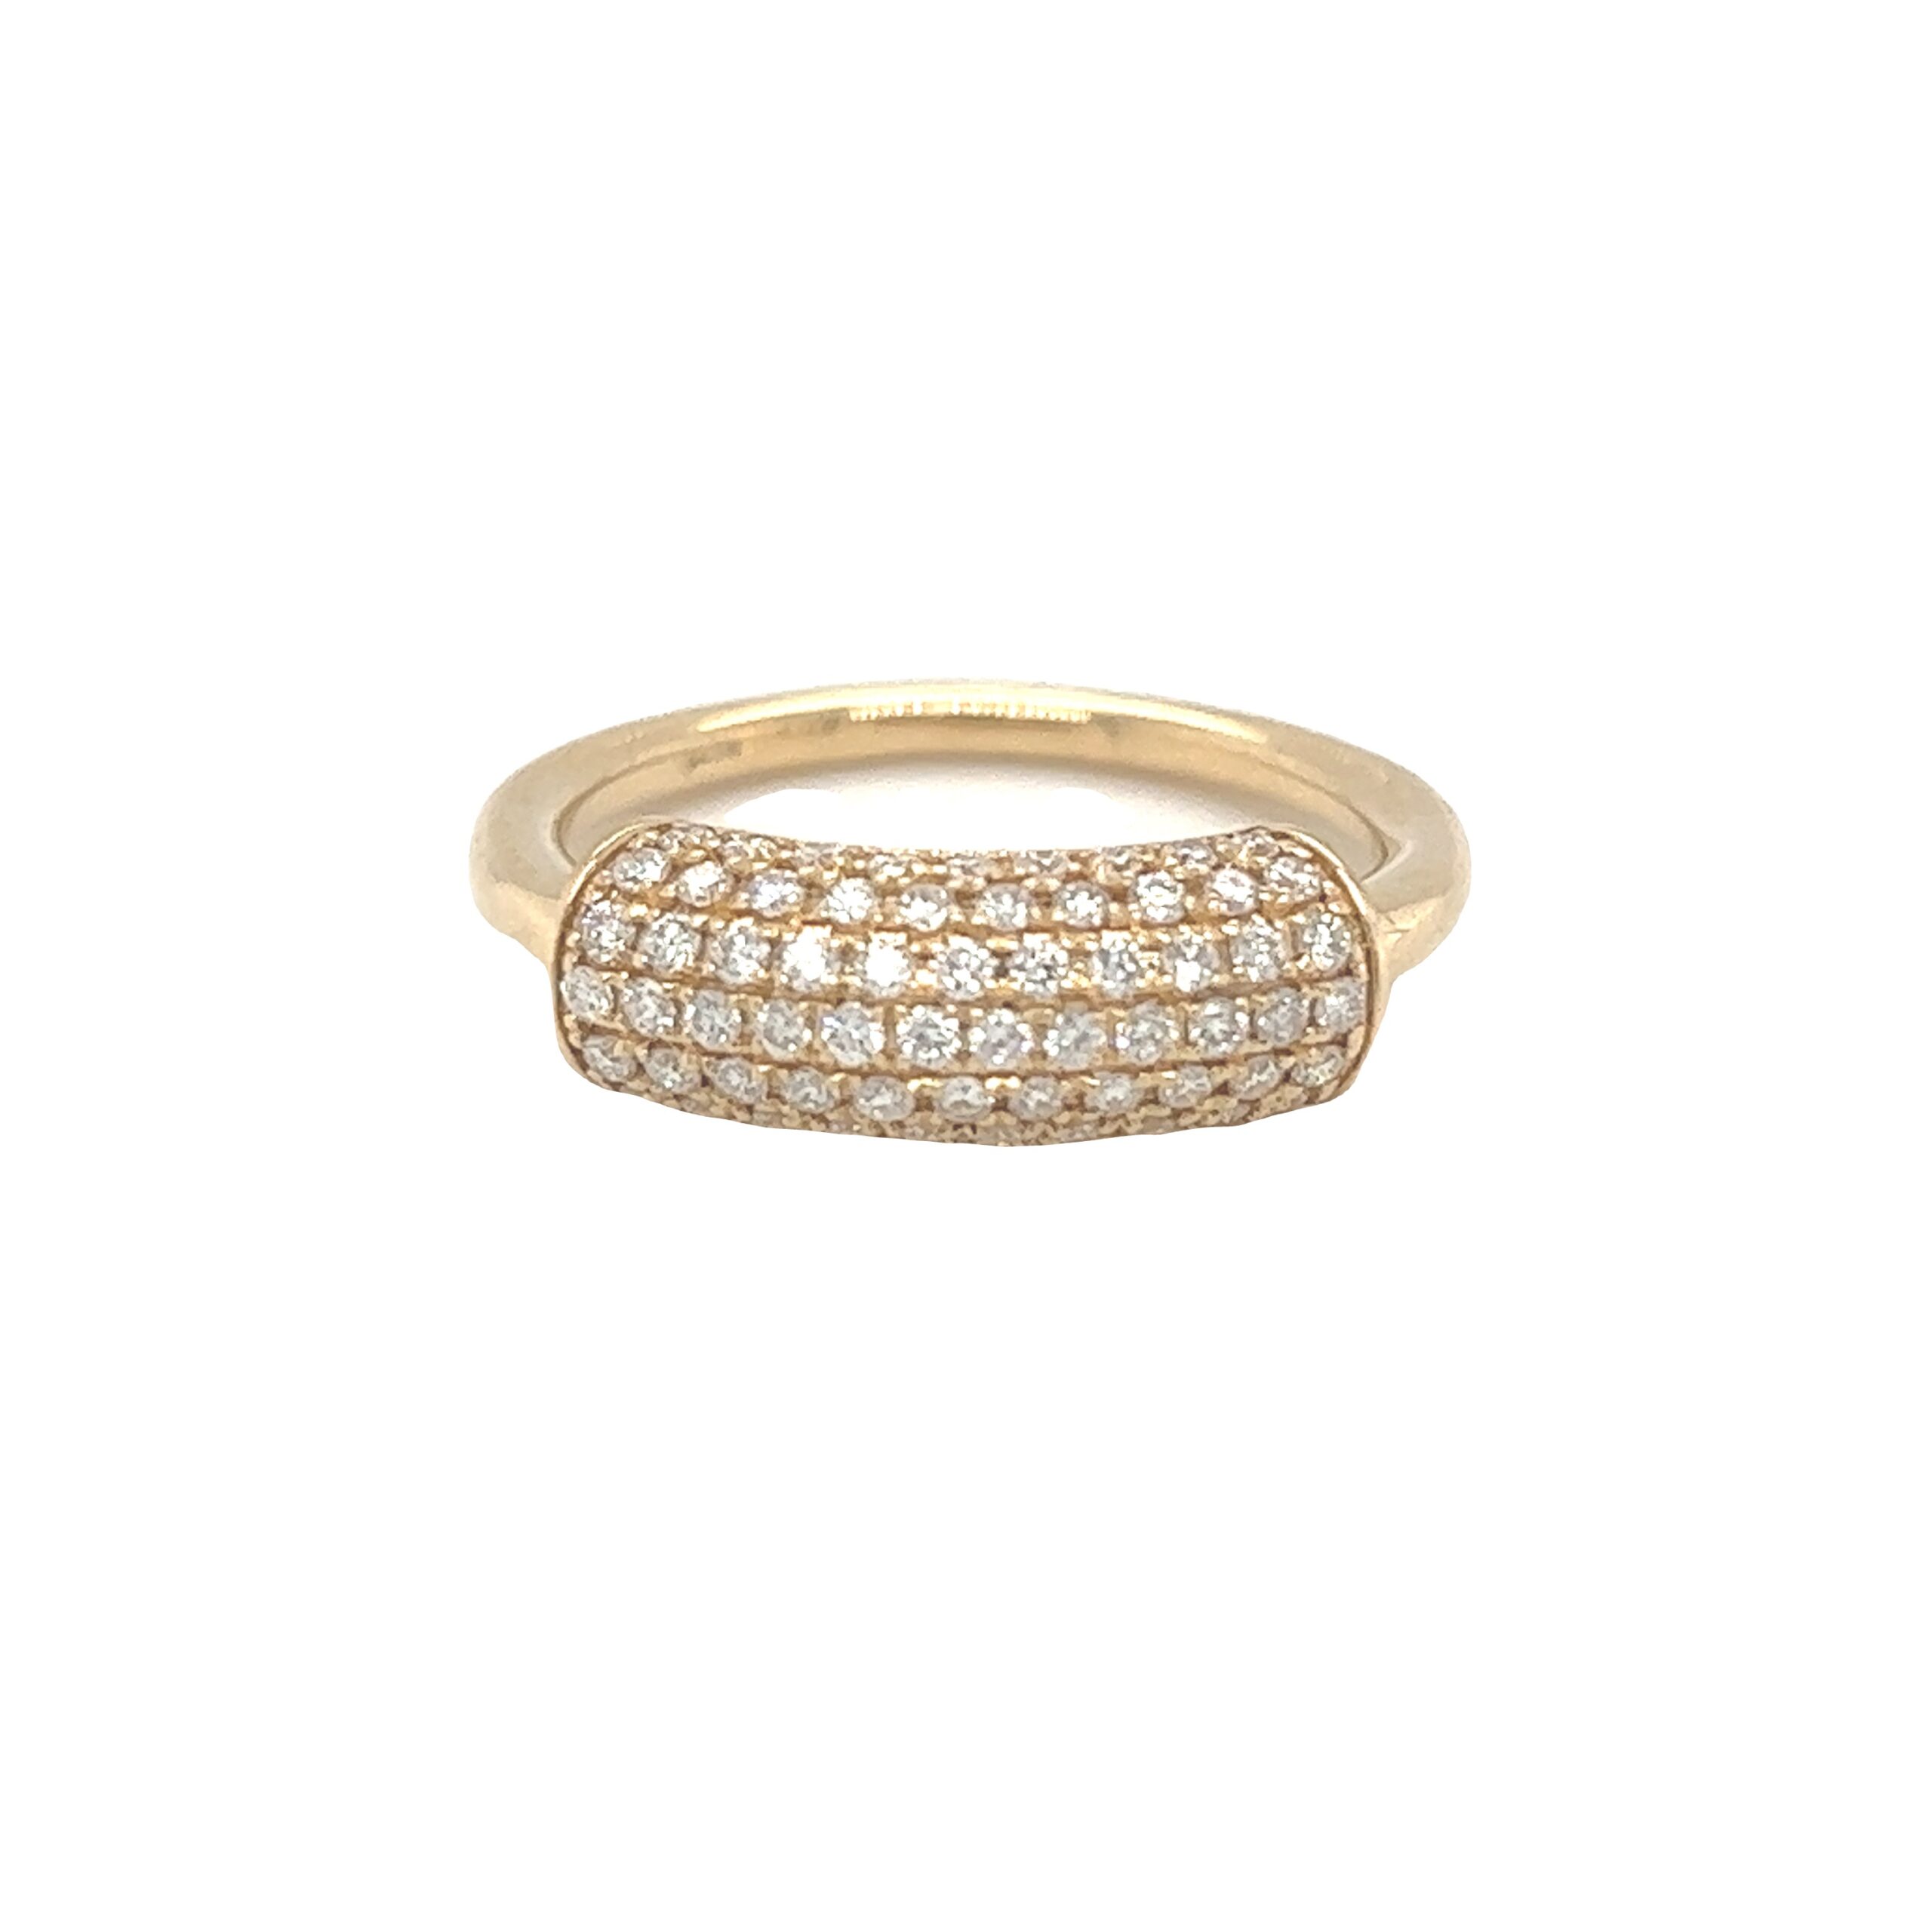 Featured image for “Pave Tube Ring”